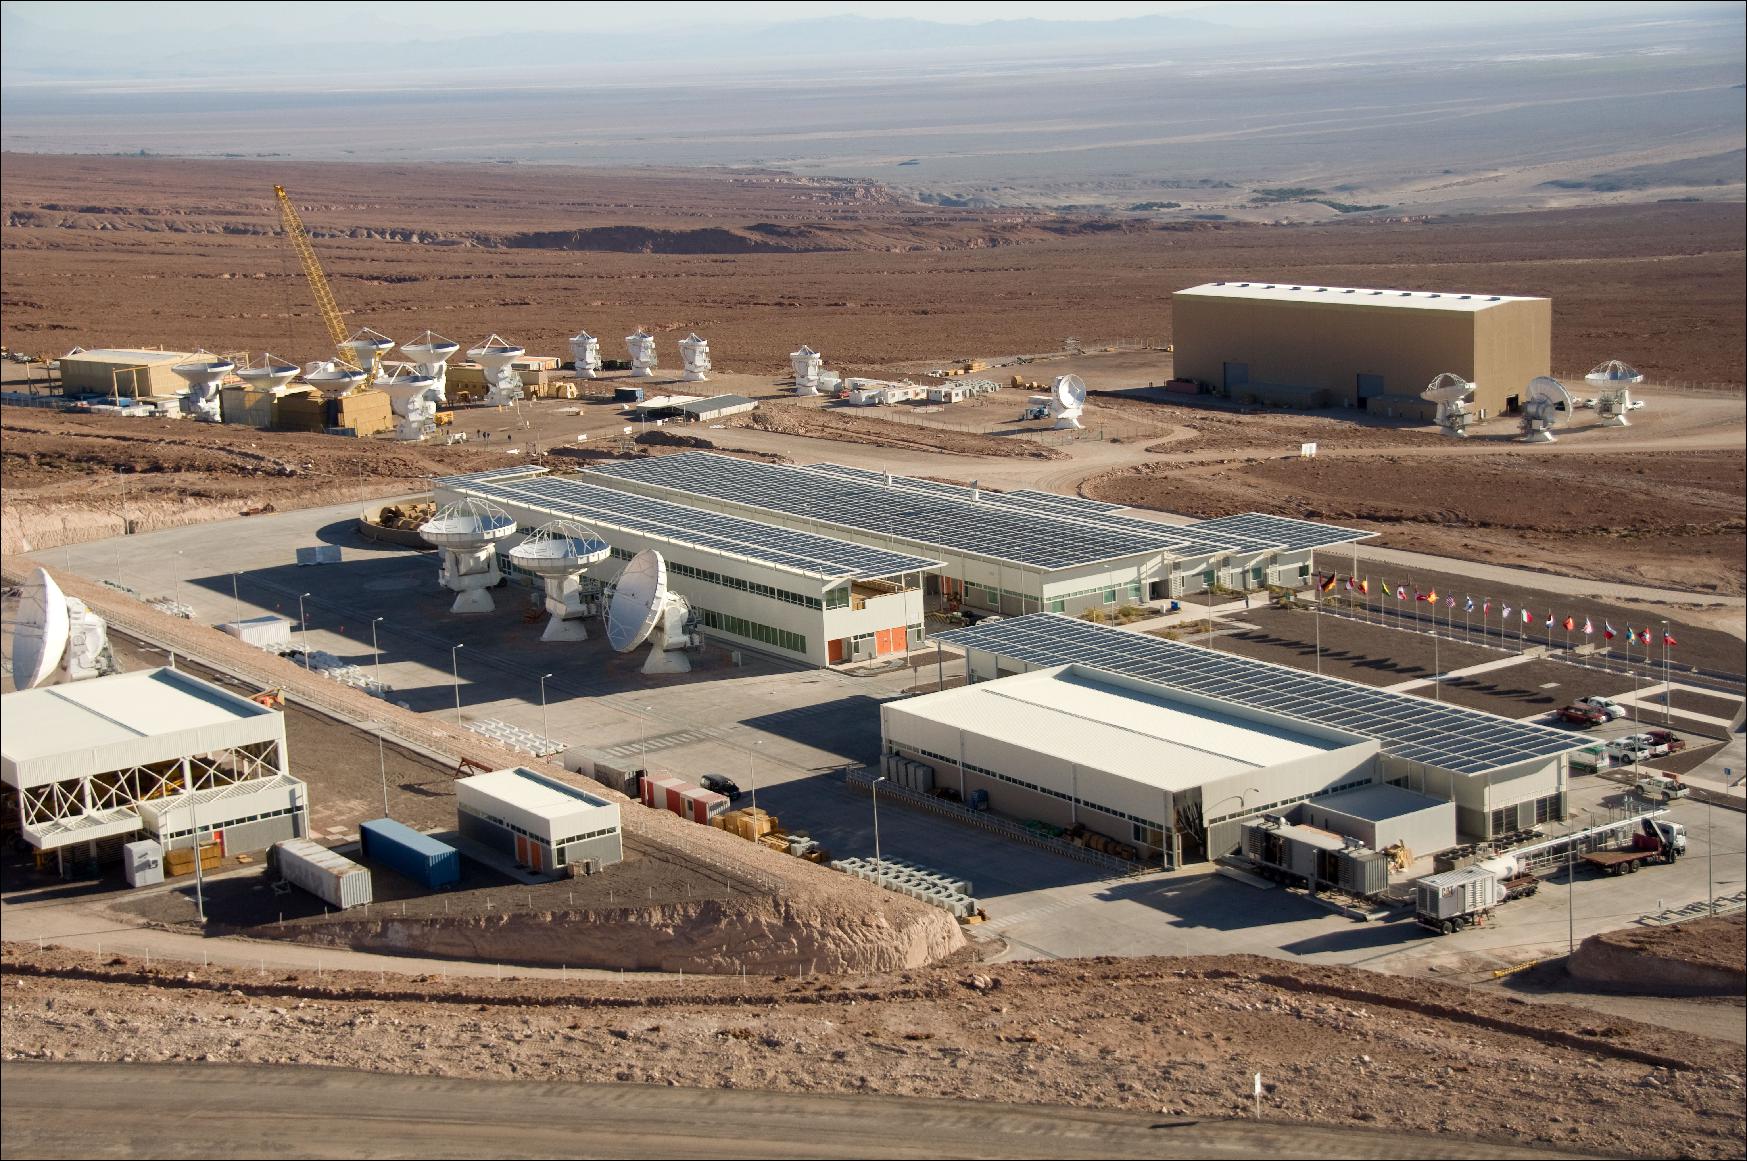 Figure 8: Aerial view of the ALMA OSF (Operation Support Facility) at 2,900 m altitude (image credit: ALMA partnership)